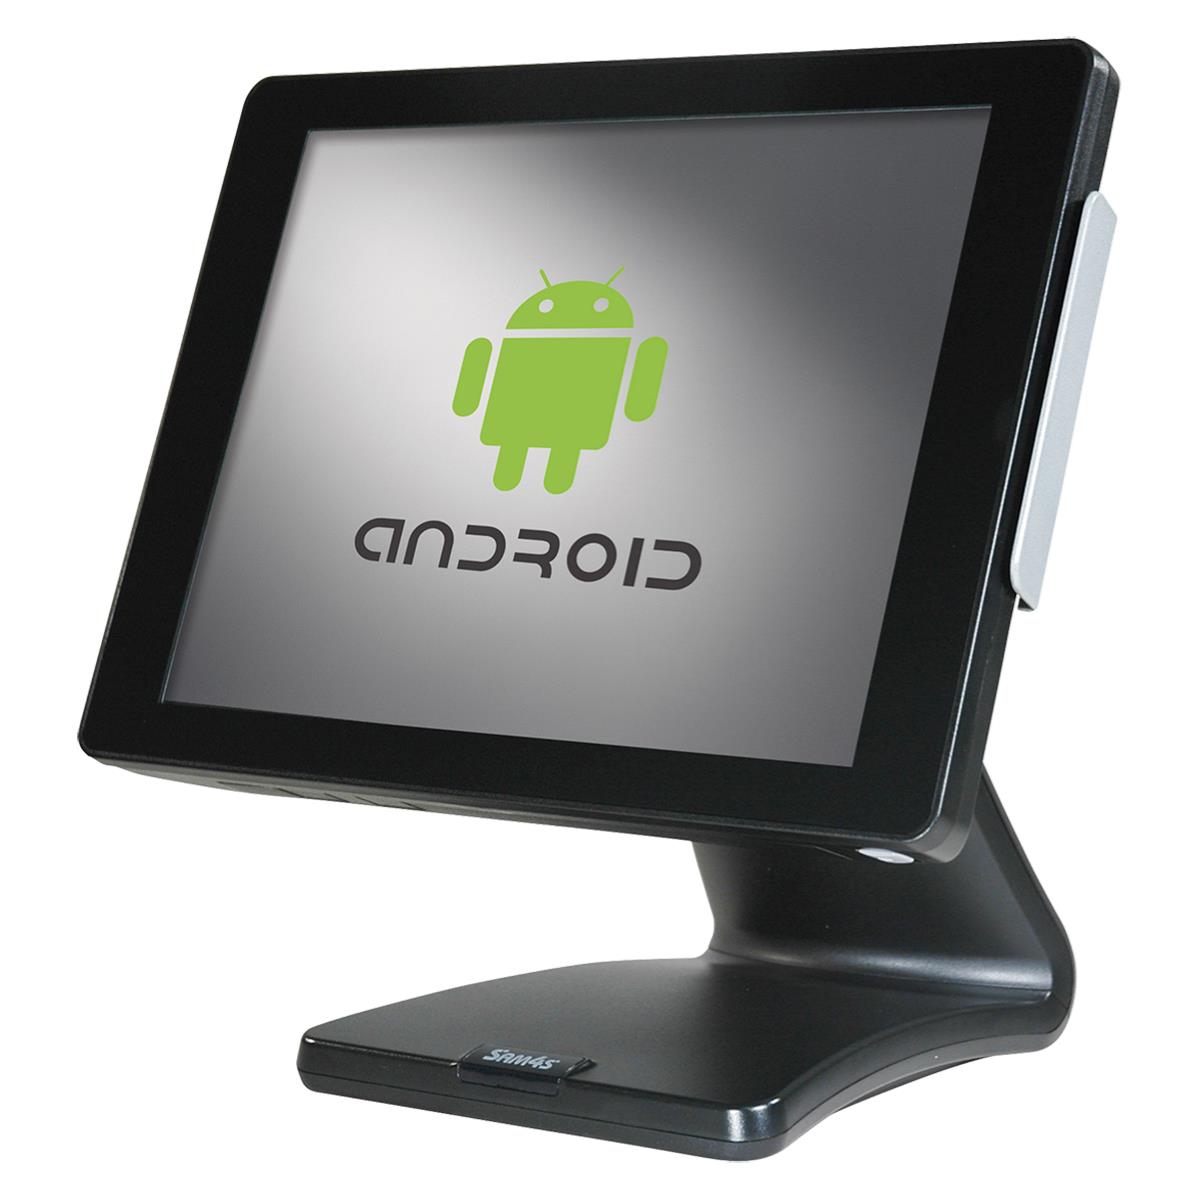 A digital display stand showing the android logo on its screen.